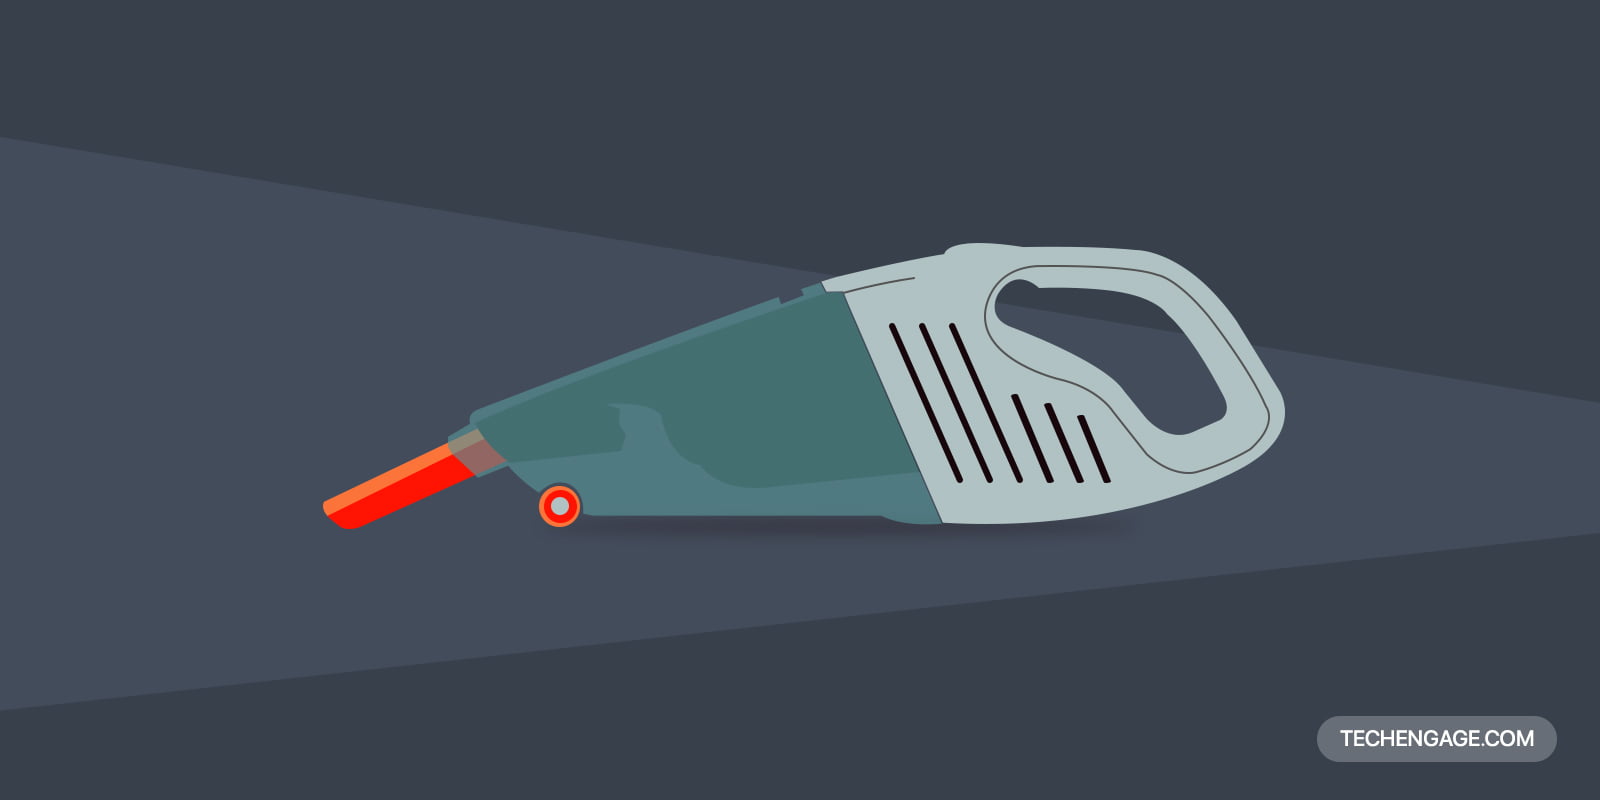 An illustration of a car vacuum cleaner